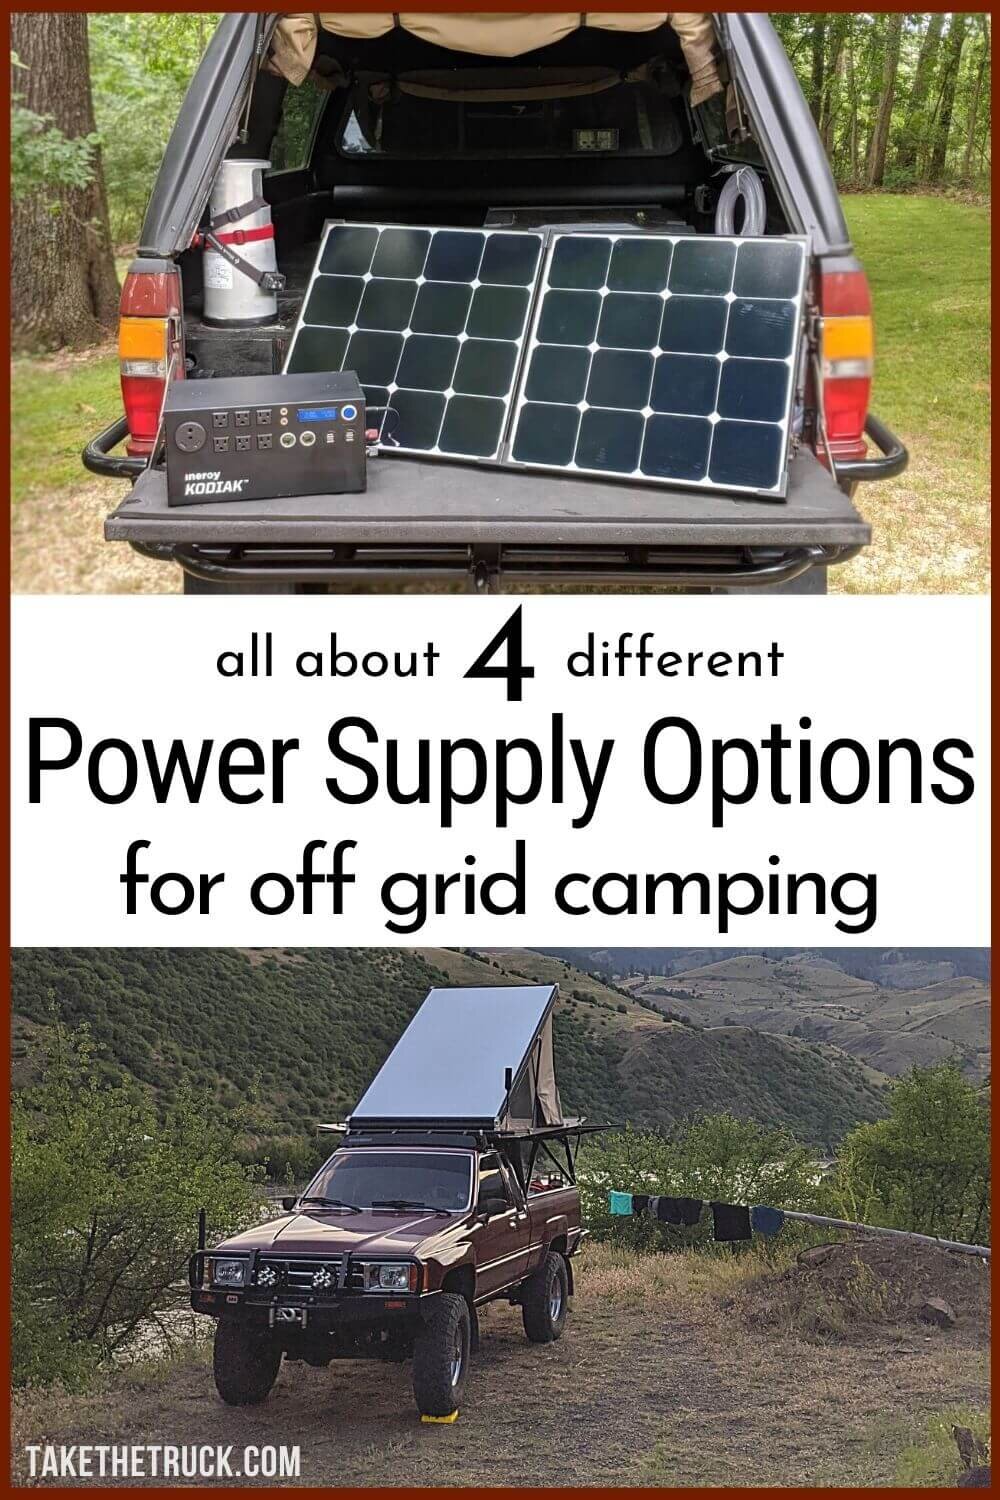 Camping power supply is a big choice! This post outlines 4 camping power supply ideas - your vehicle’s battery and inverter, a dual battery setup, or using a solar generator or gas inverter generator.